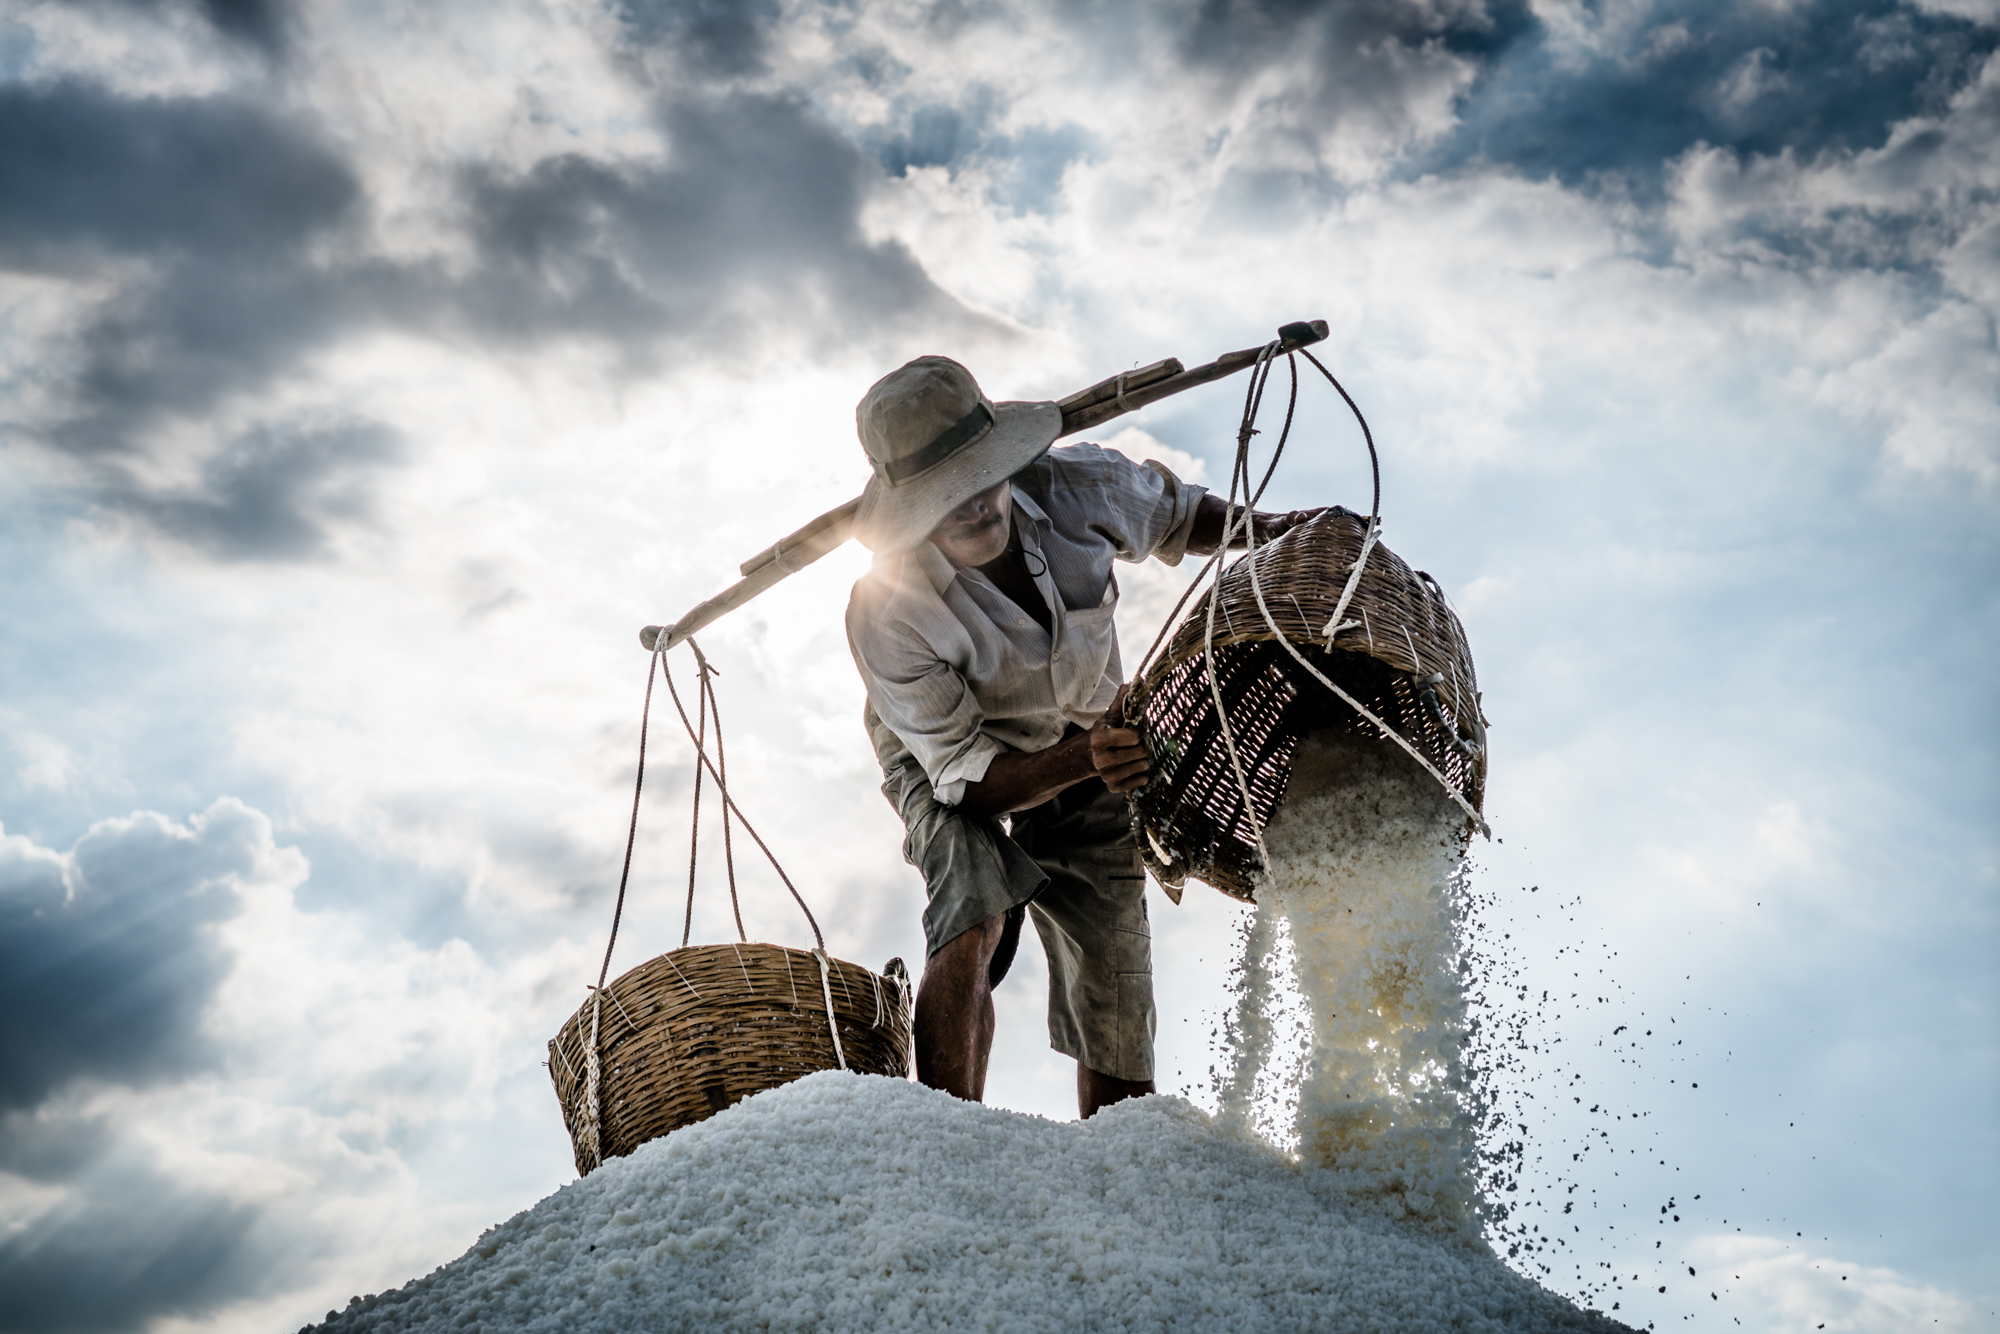 A man works to harvest salt in the late afternoon sun in Can Gio, Vietnam, outside of Ho Chi Minh City.